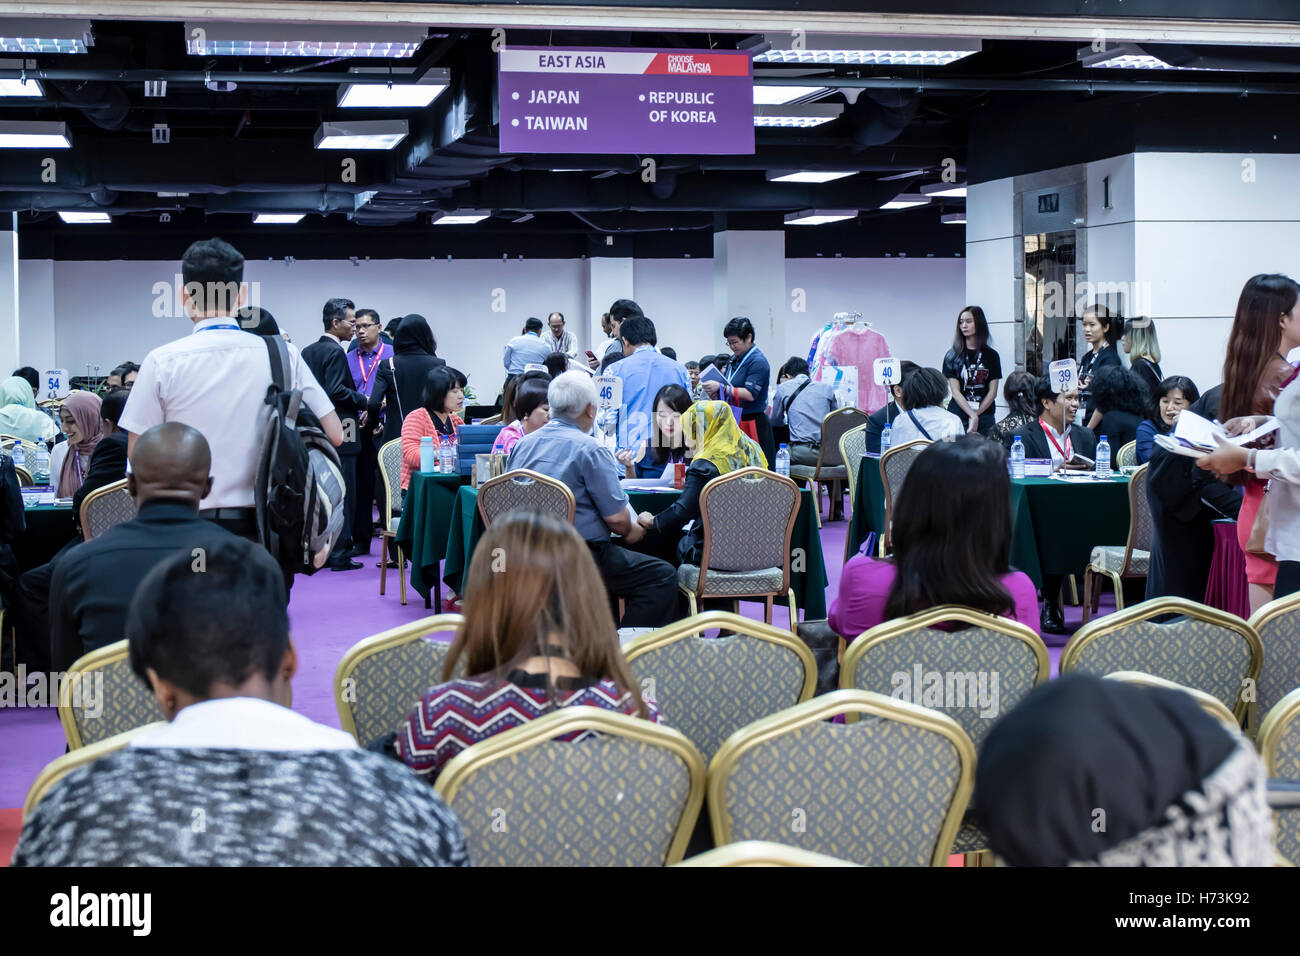 Kuala Lumpur, Malaysia. 2nd Nov, 2016.  Malaysia Fashion Week 2016 starts today at MATRADE in Kuala Lumpur, Malaysia. Fashion industry traders from Asia region gathers to market their clothings, cloths and handicrafts. Credit:  Danny Chan/Alamy Live News. Stock Photo